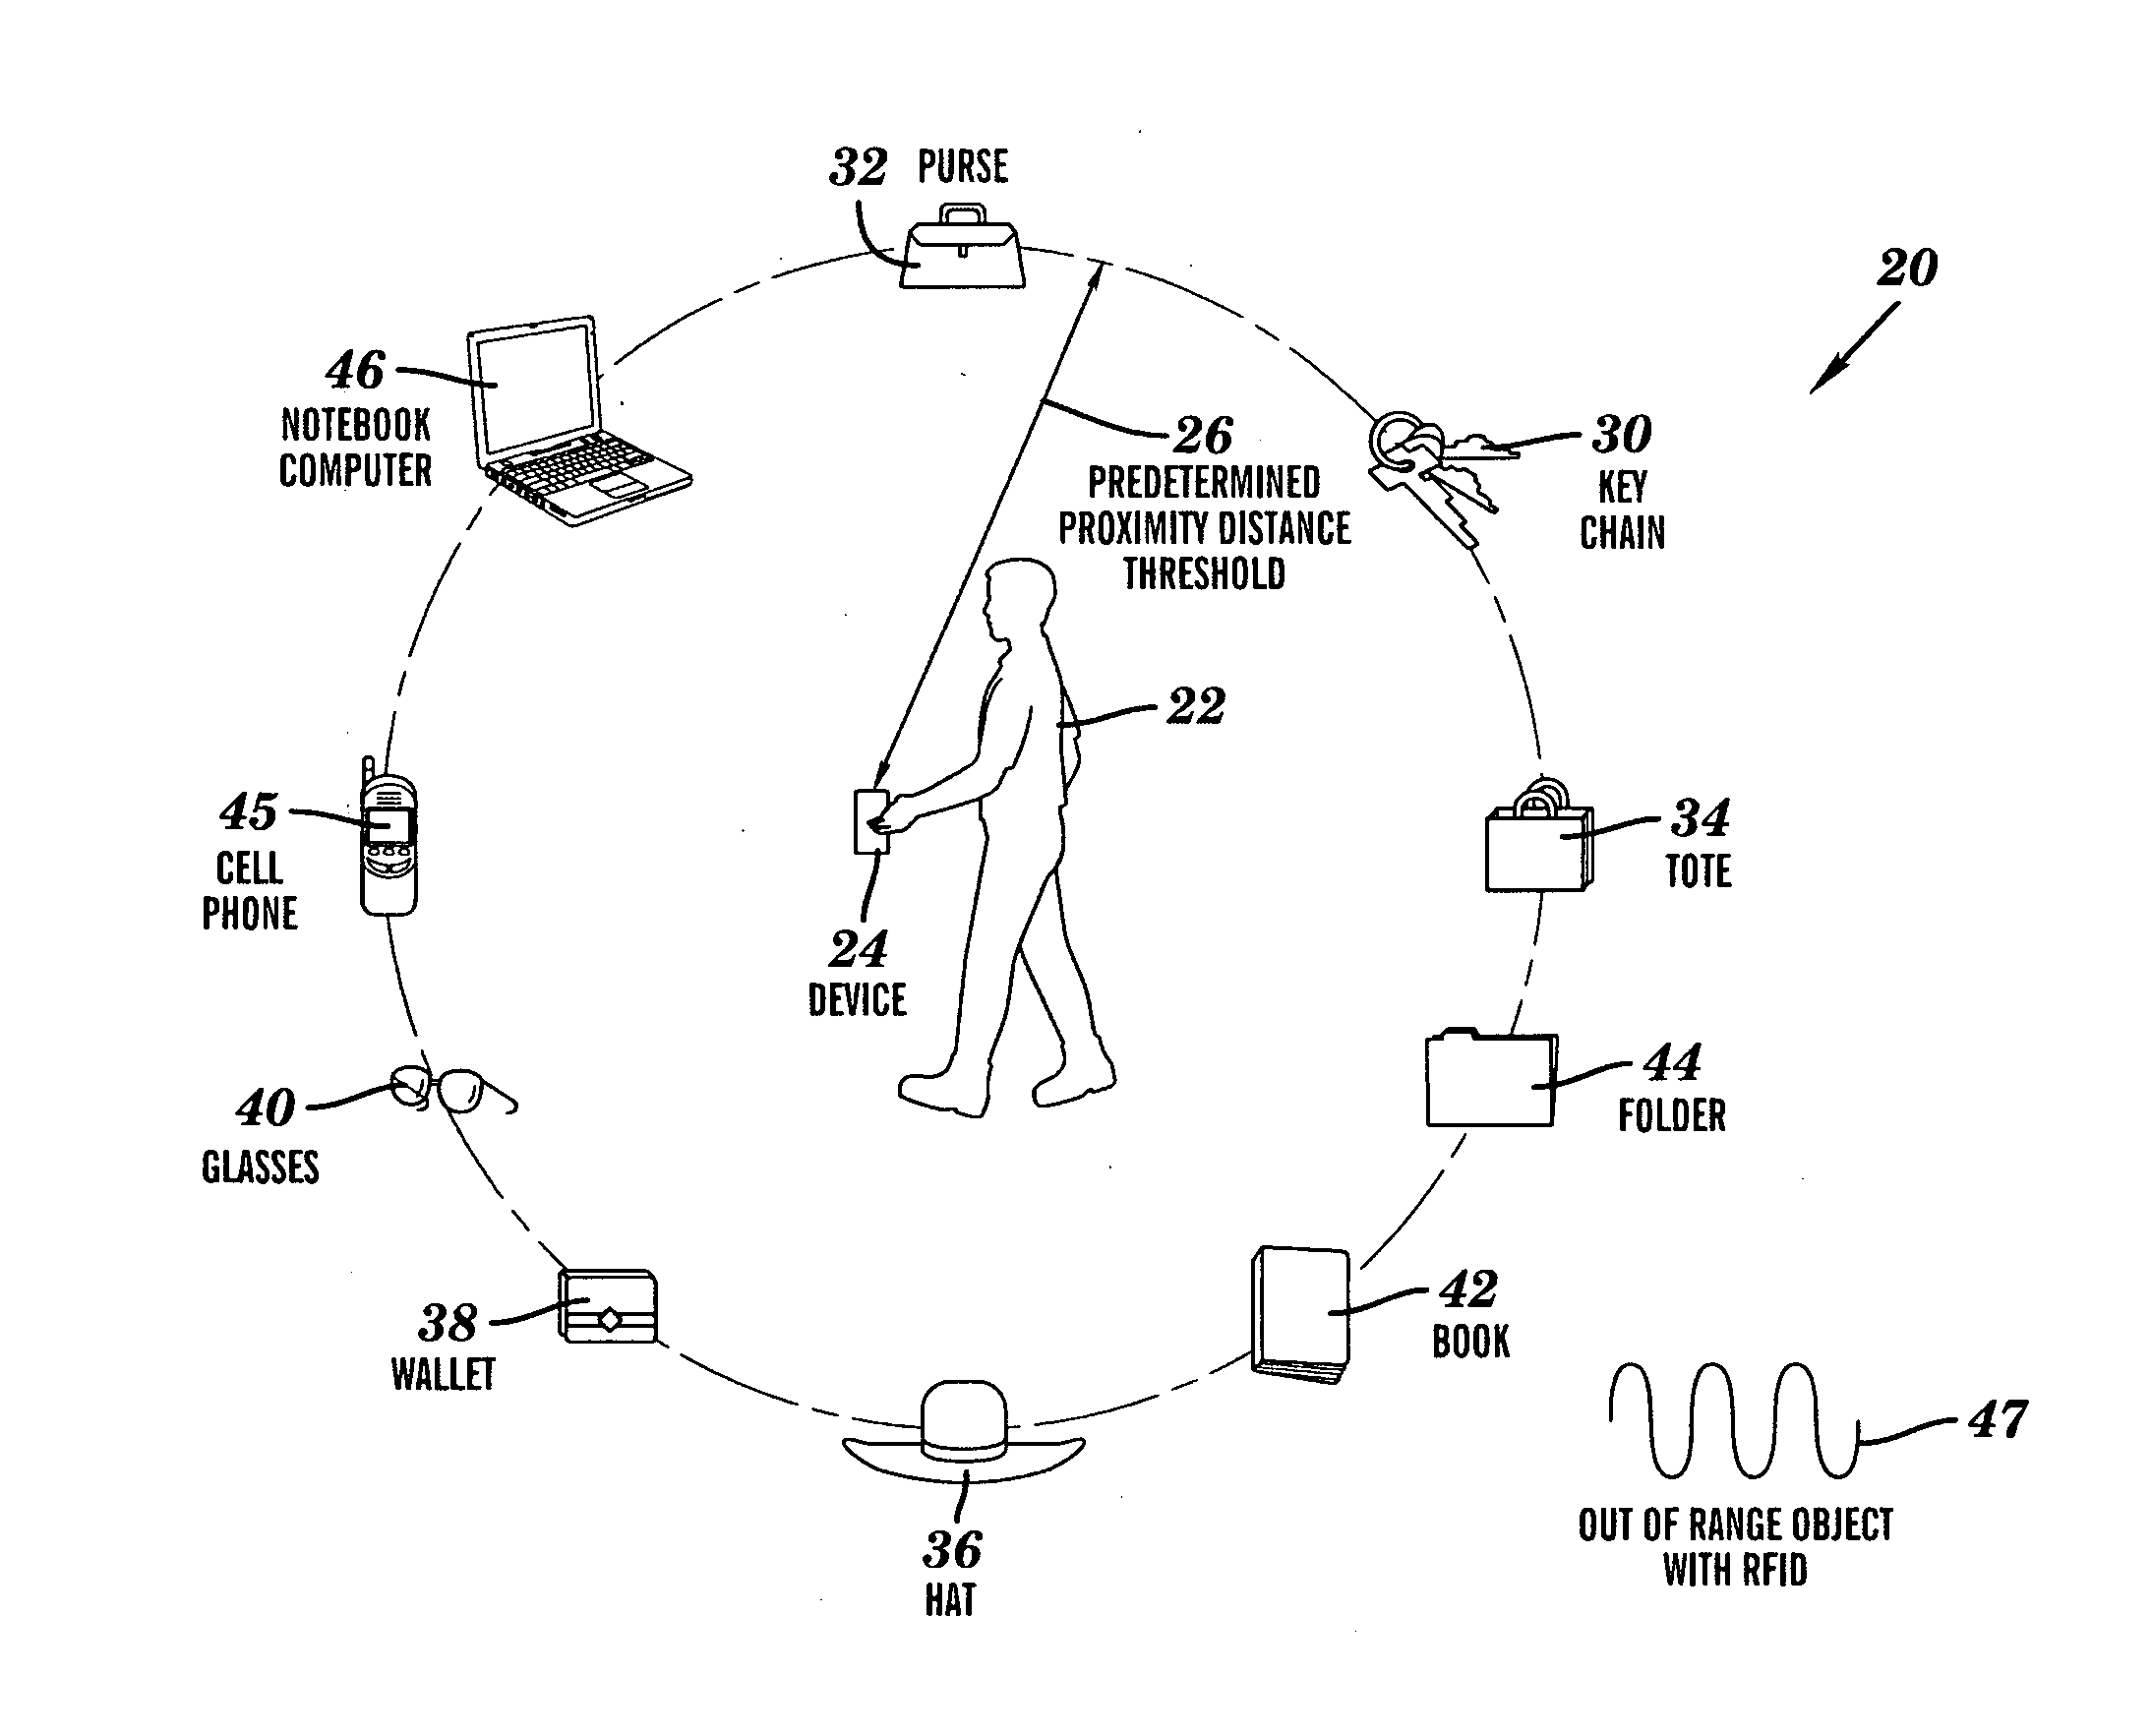 Systems and methods for permitting movement of an object outside a predetermined proximity distance threshold